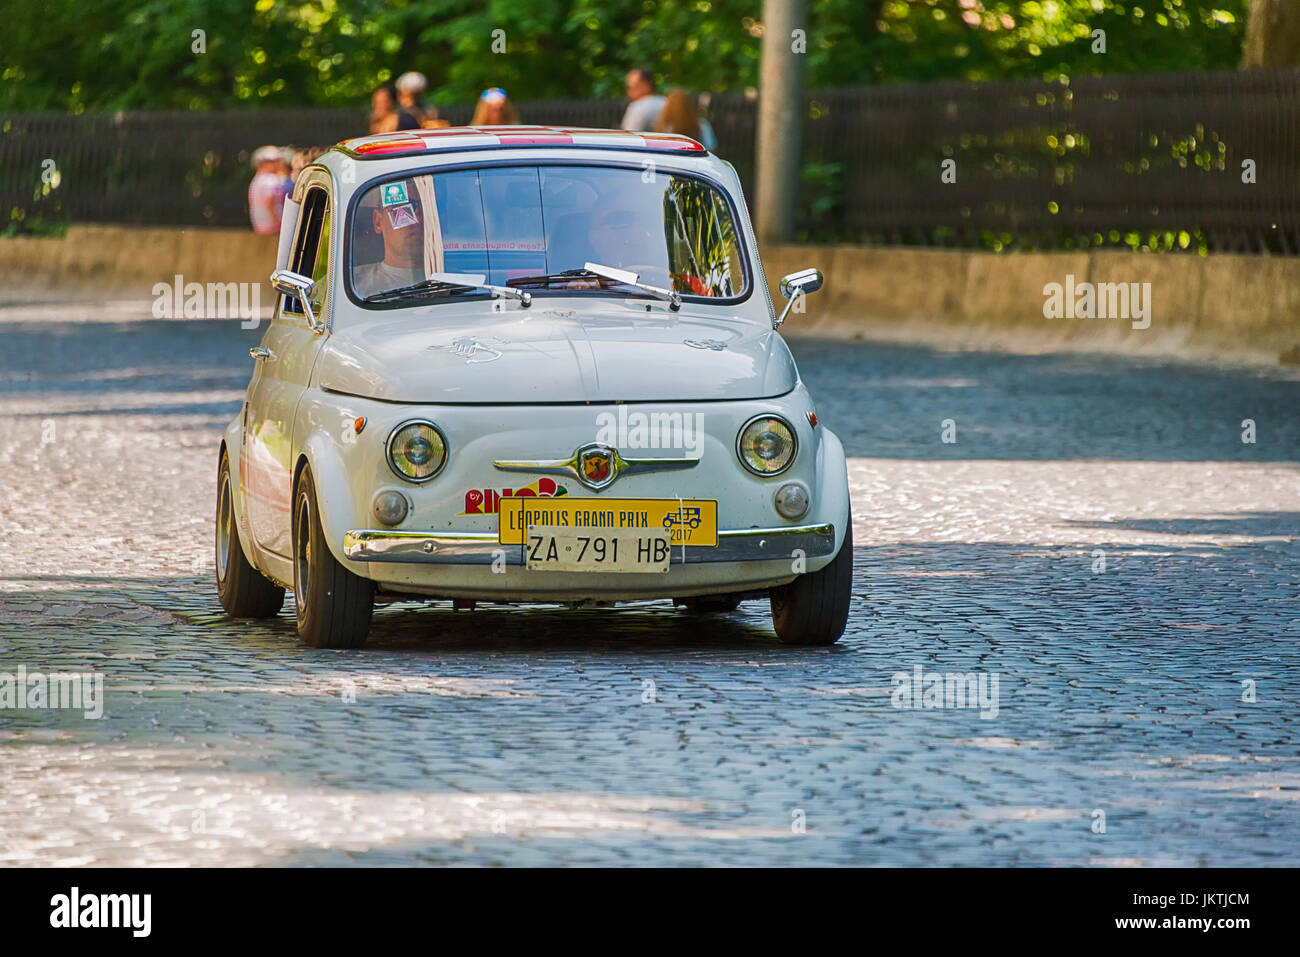 Fiat Abarth 695 High Resolution Stock Photography And Images Alamy